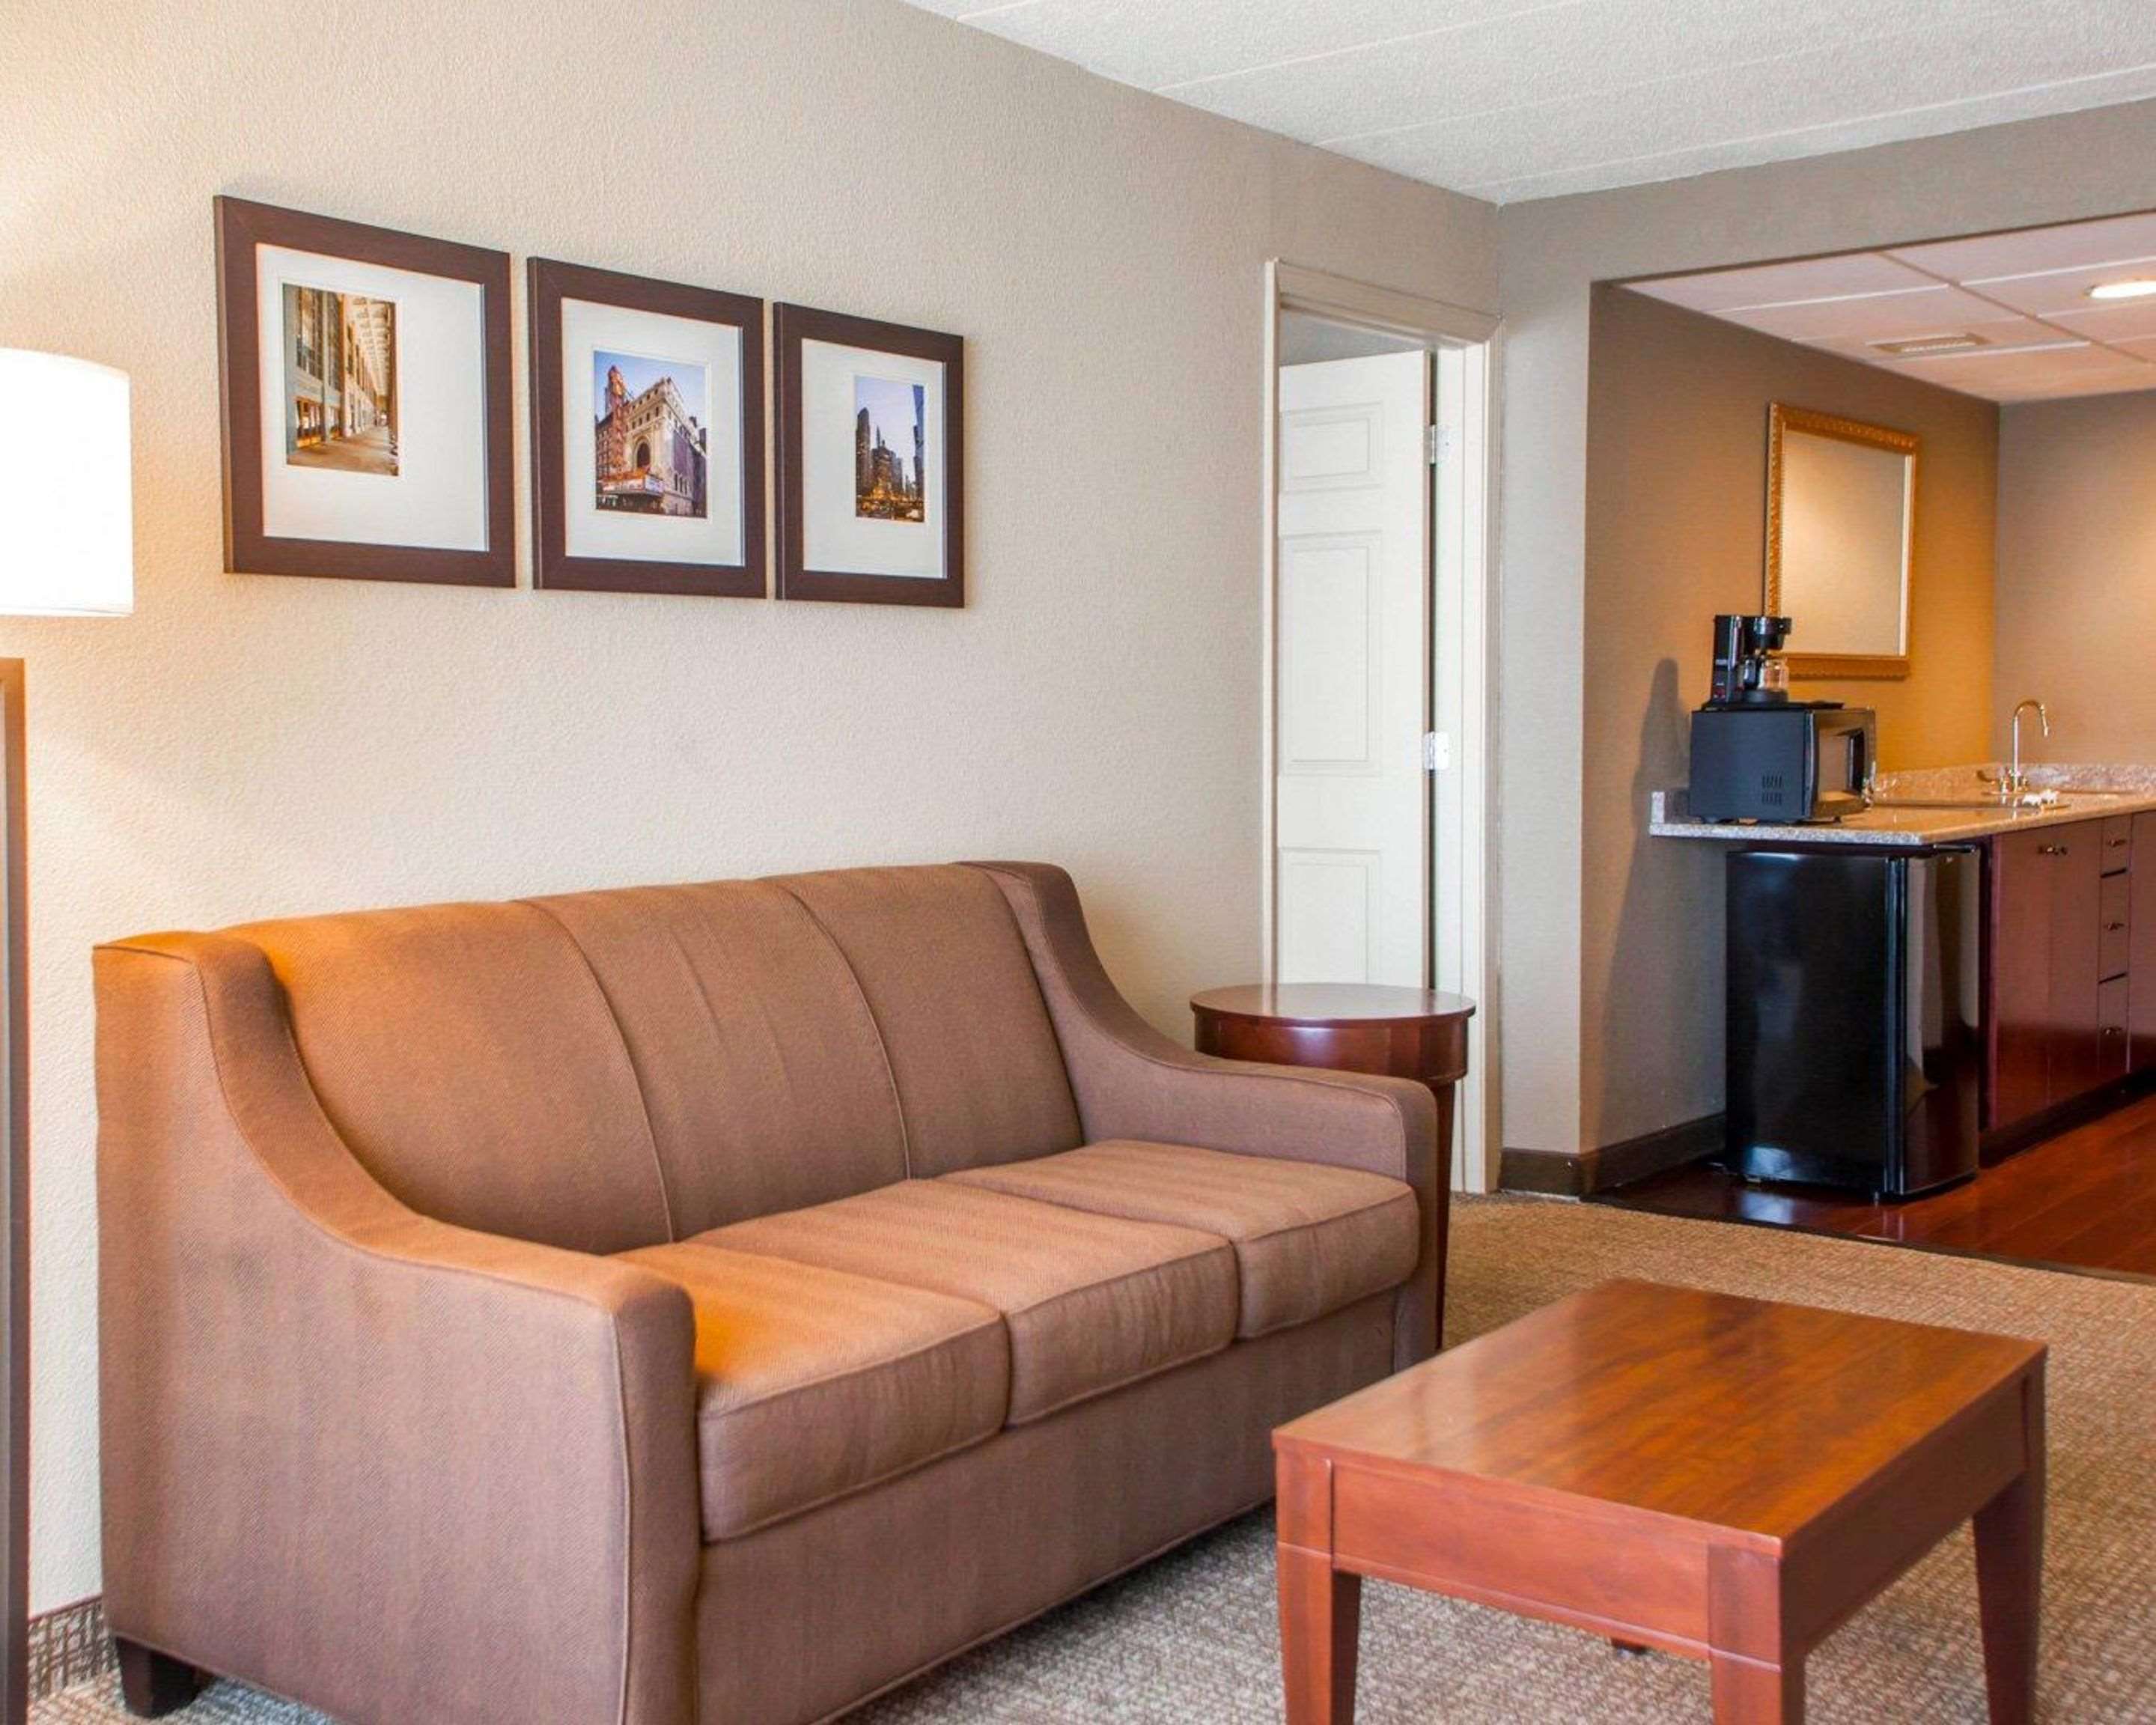 Quality Inn & Suites Orland Park - Chicago 8800 W 159th St, Orland Park